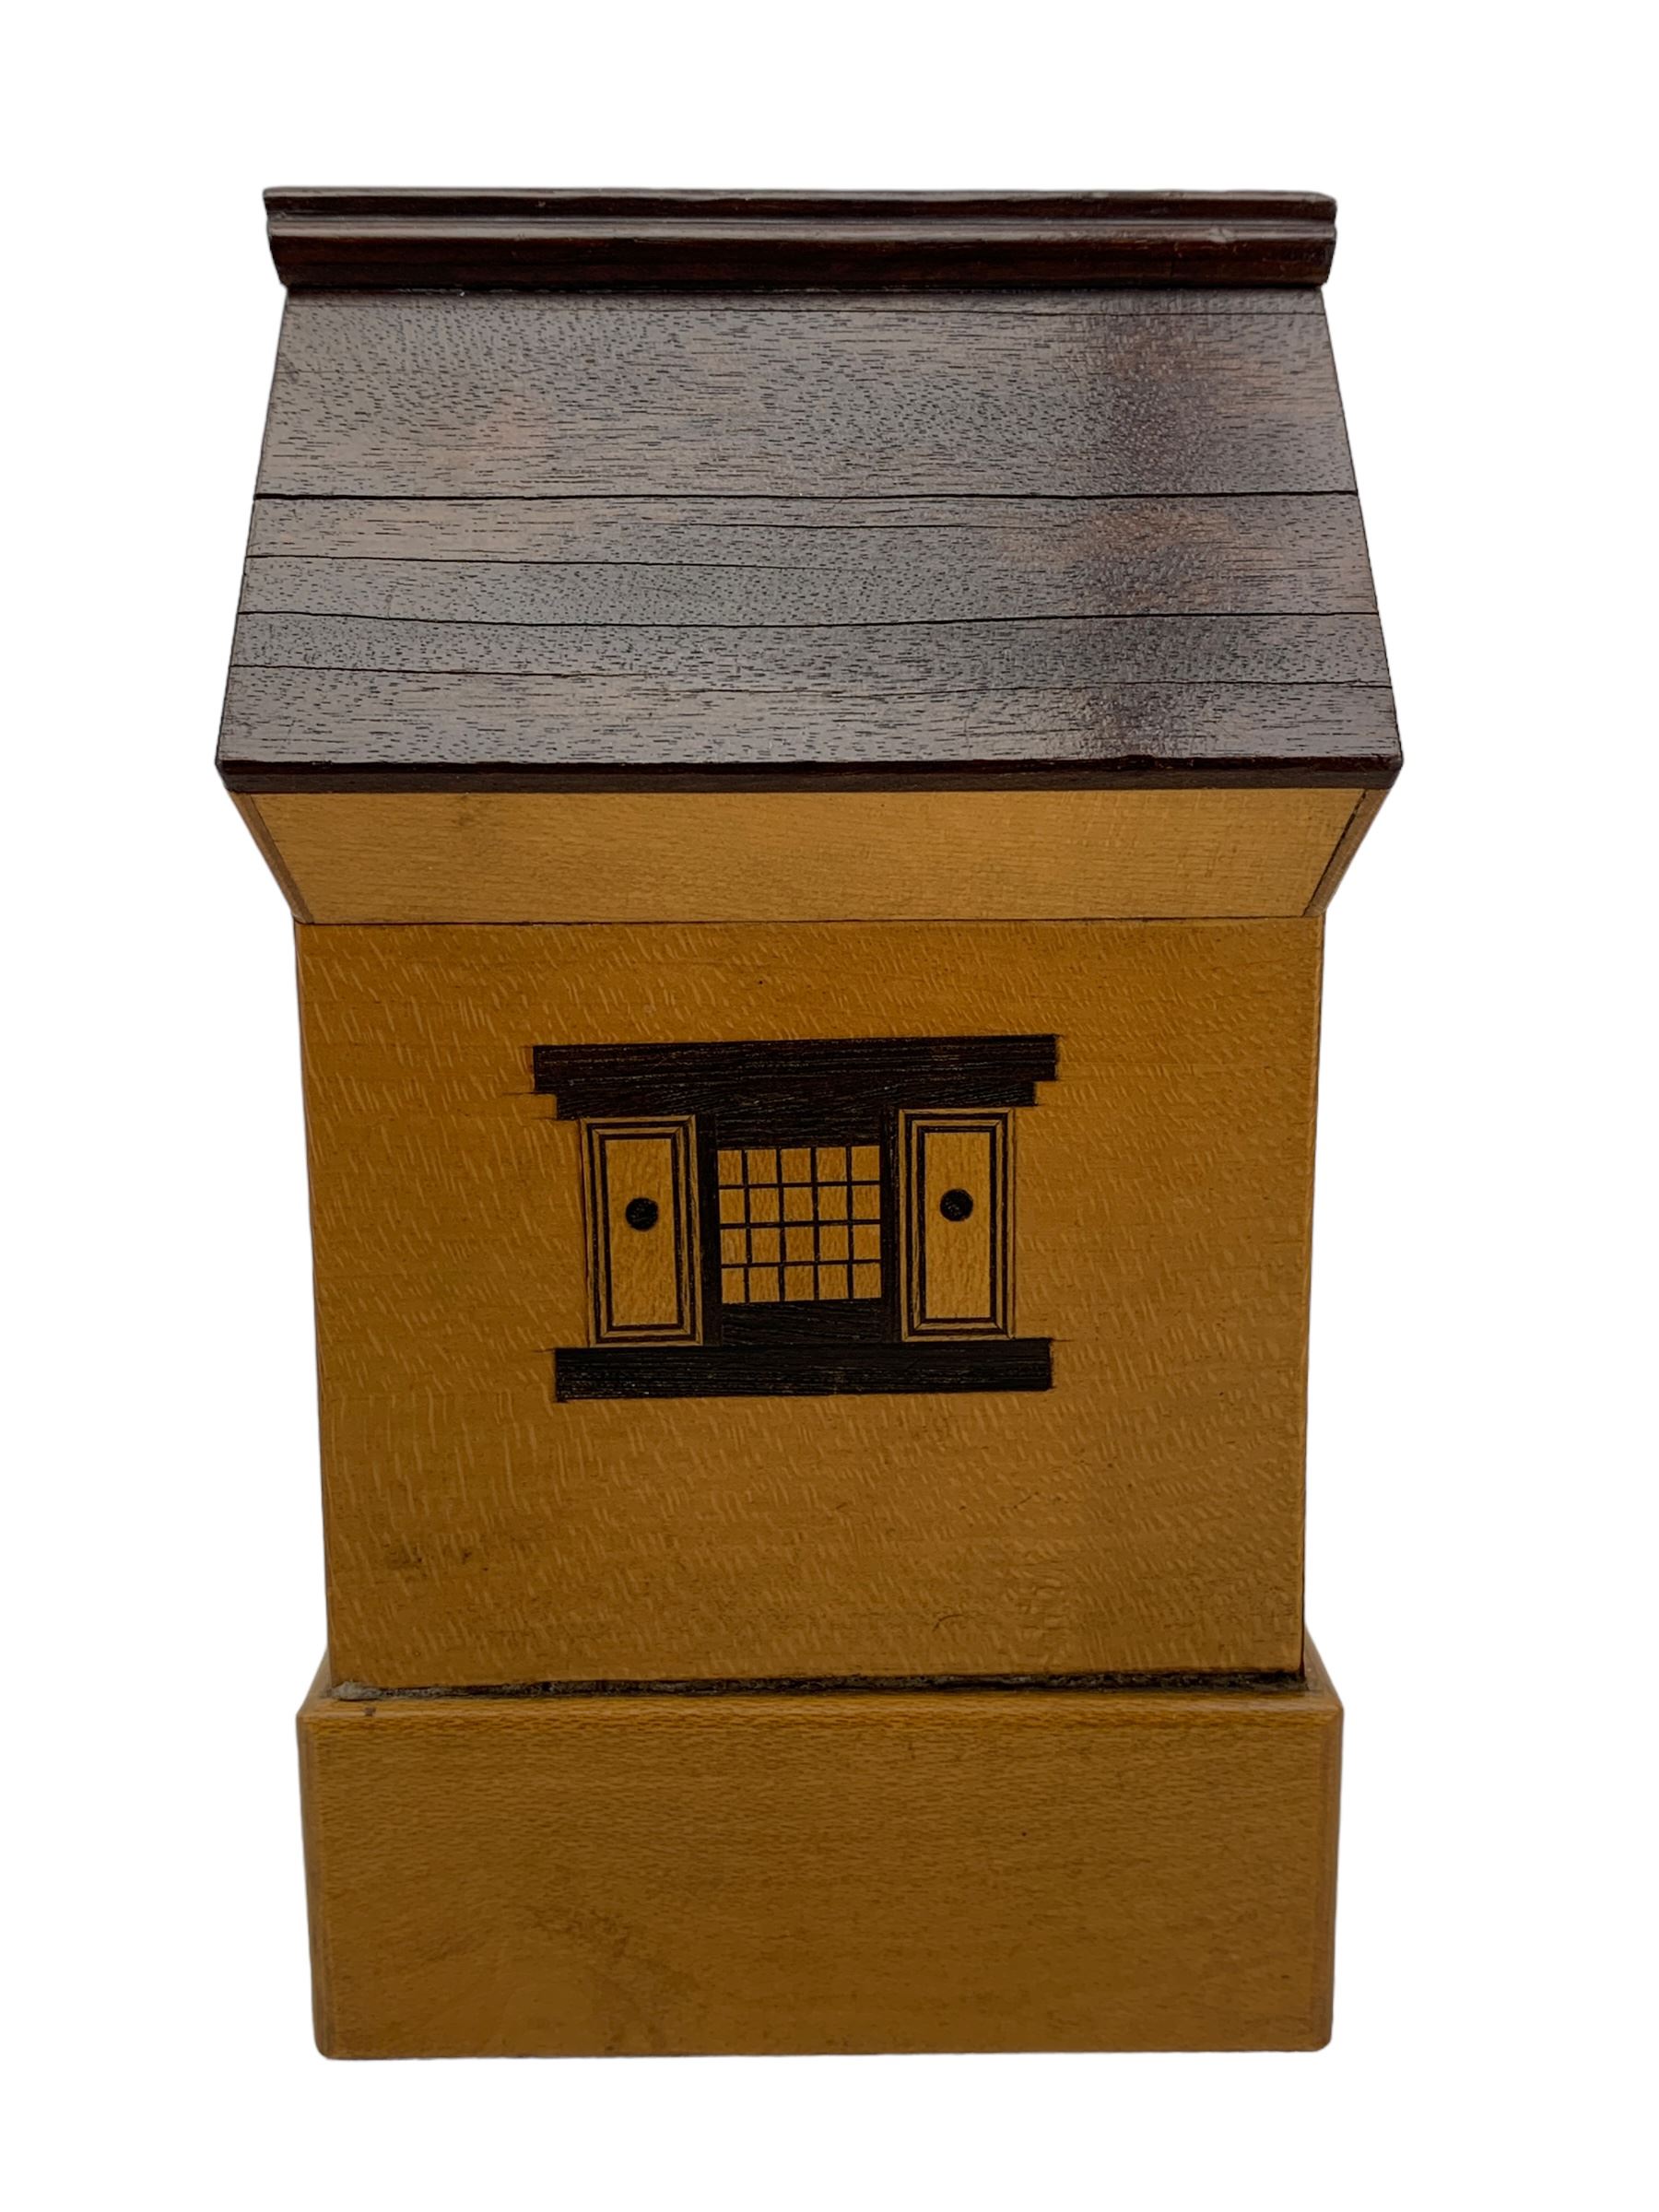 Early 20th century marquetry puzzle money box in the form of a house - Image 2 of 5